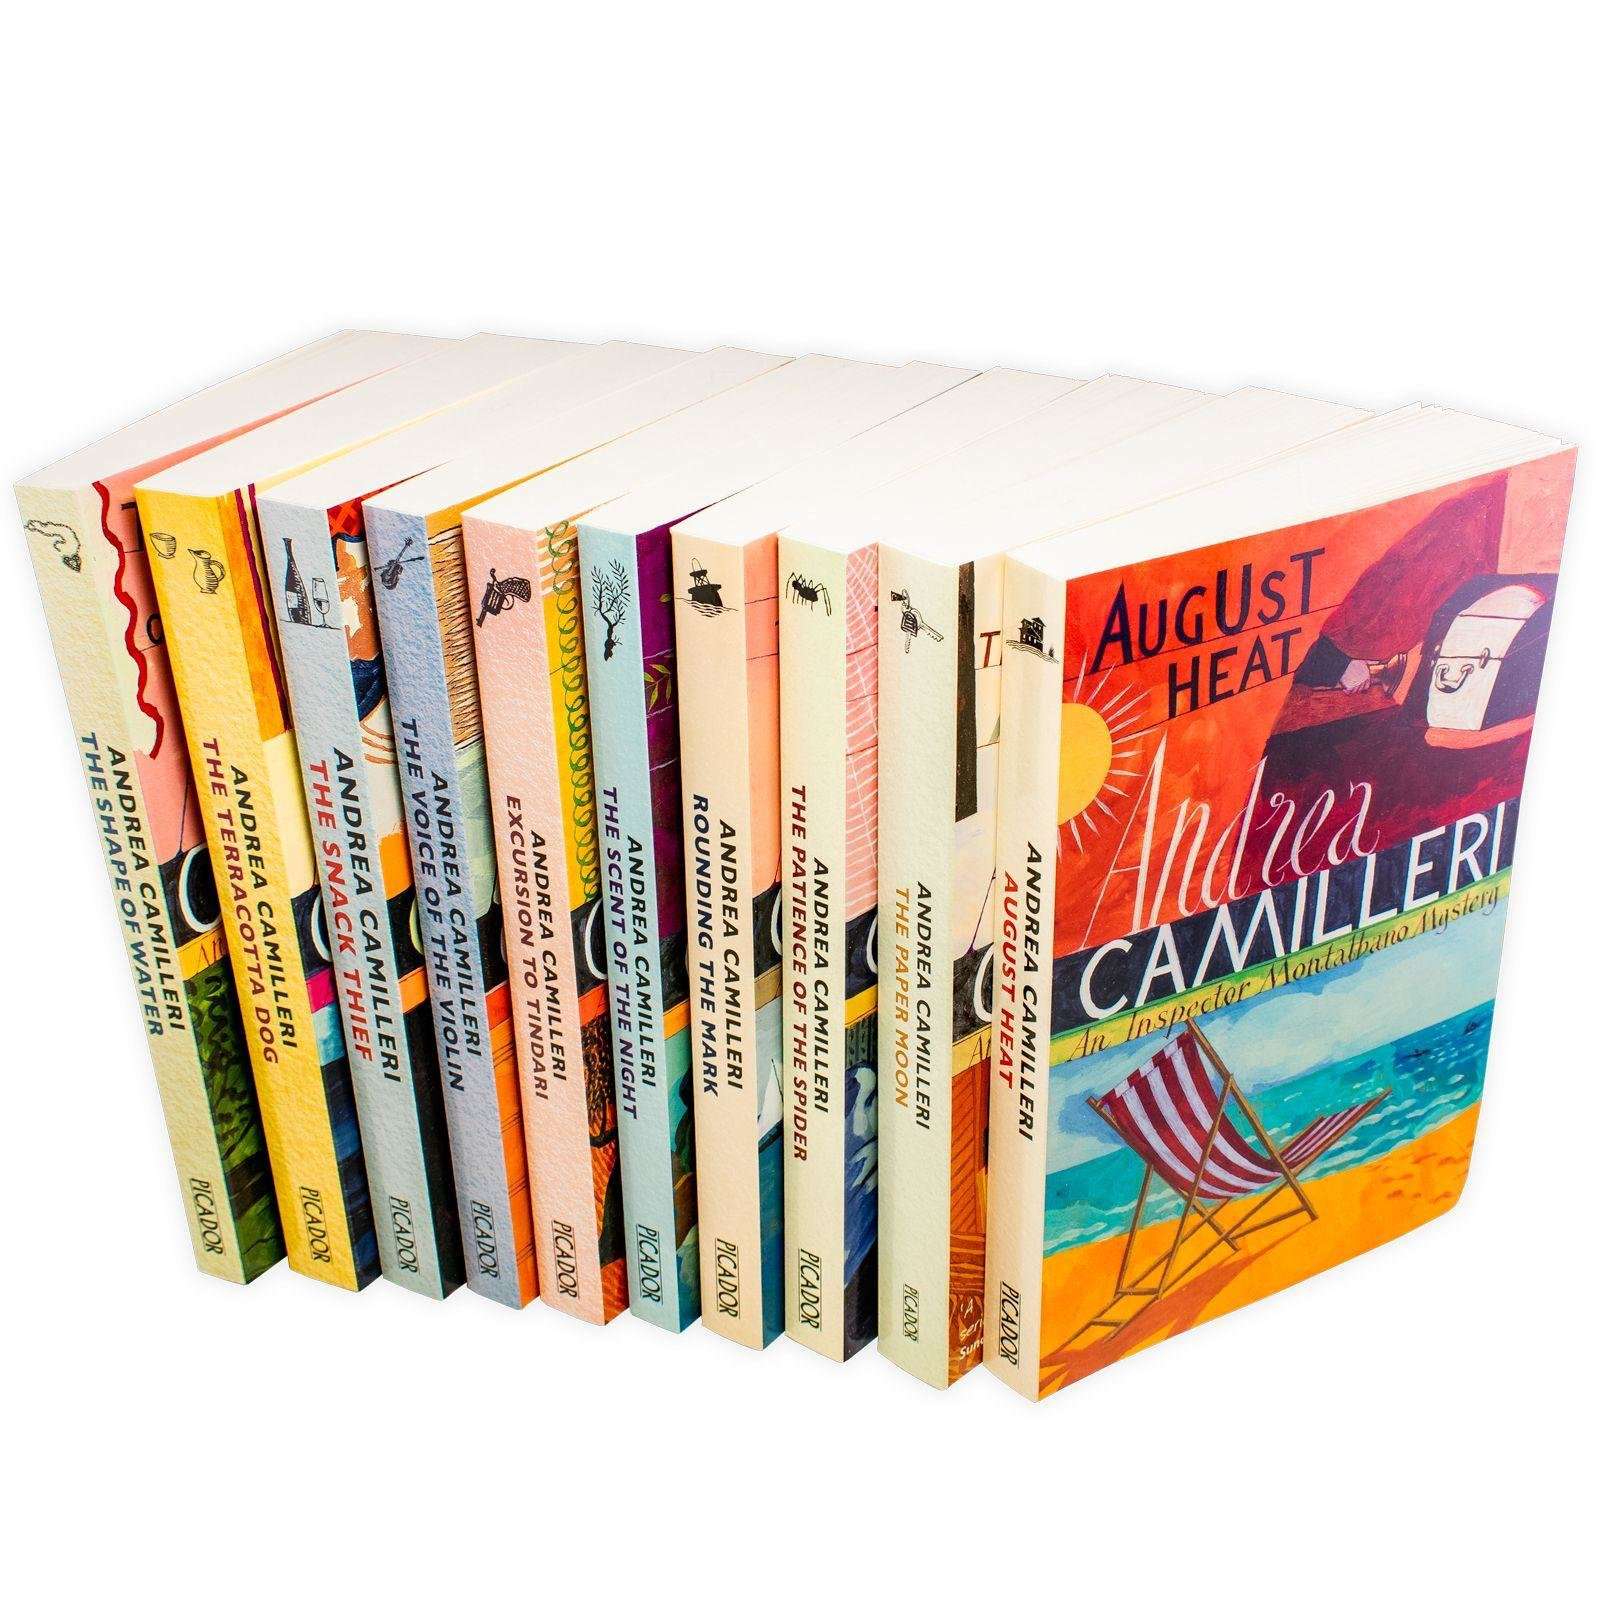 Andrea Camilleri The Inspector Montalbano Mysteries 10 Books Collection - St Stephens Books